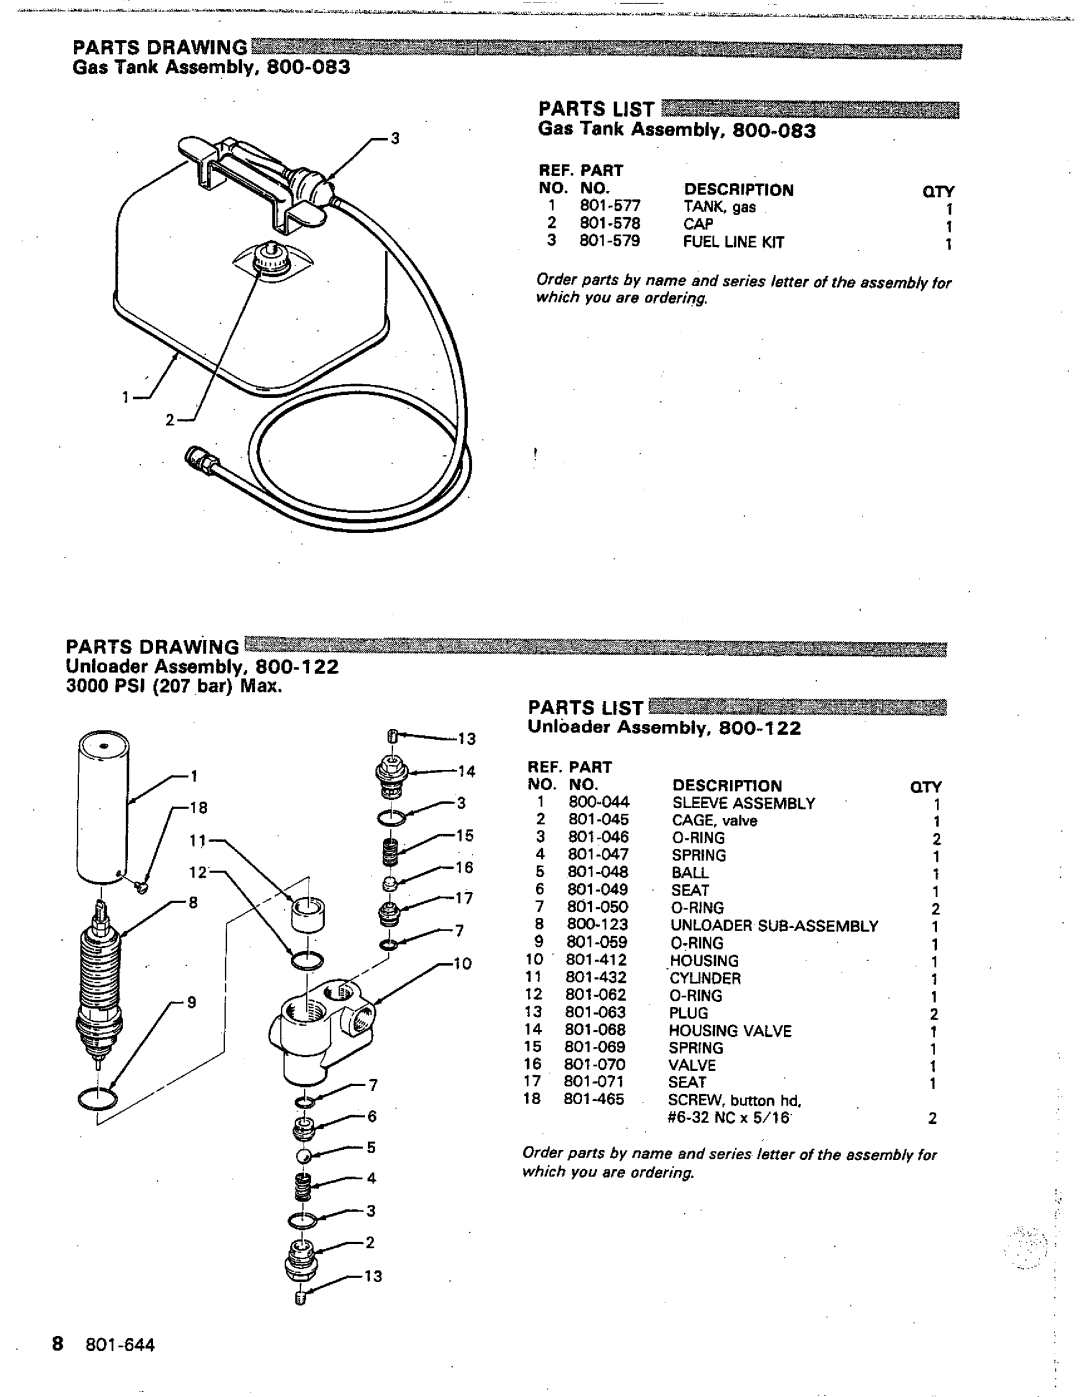 Graco Inc 3245 PARTS DRAWING Gas Tank Assembly PARTS LIST, No. No, Parts Drawing, PARTS LIST Unloader Assembly, 8801-644 